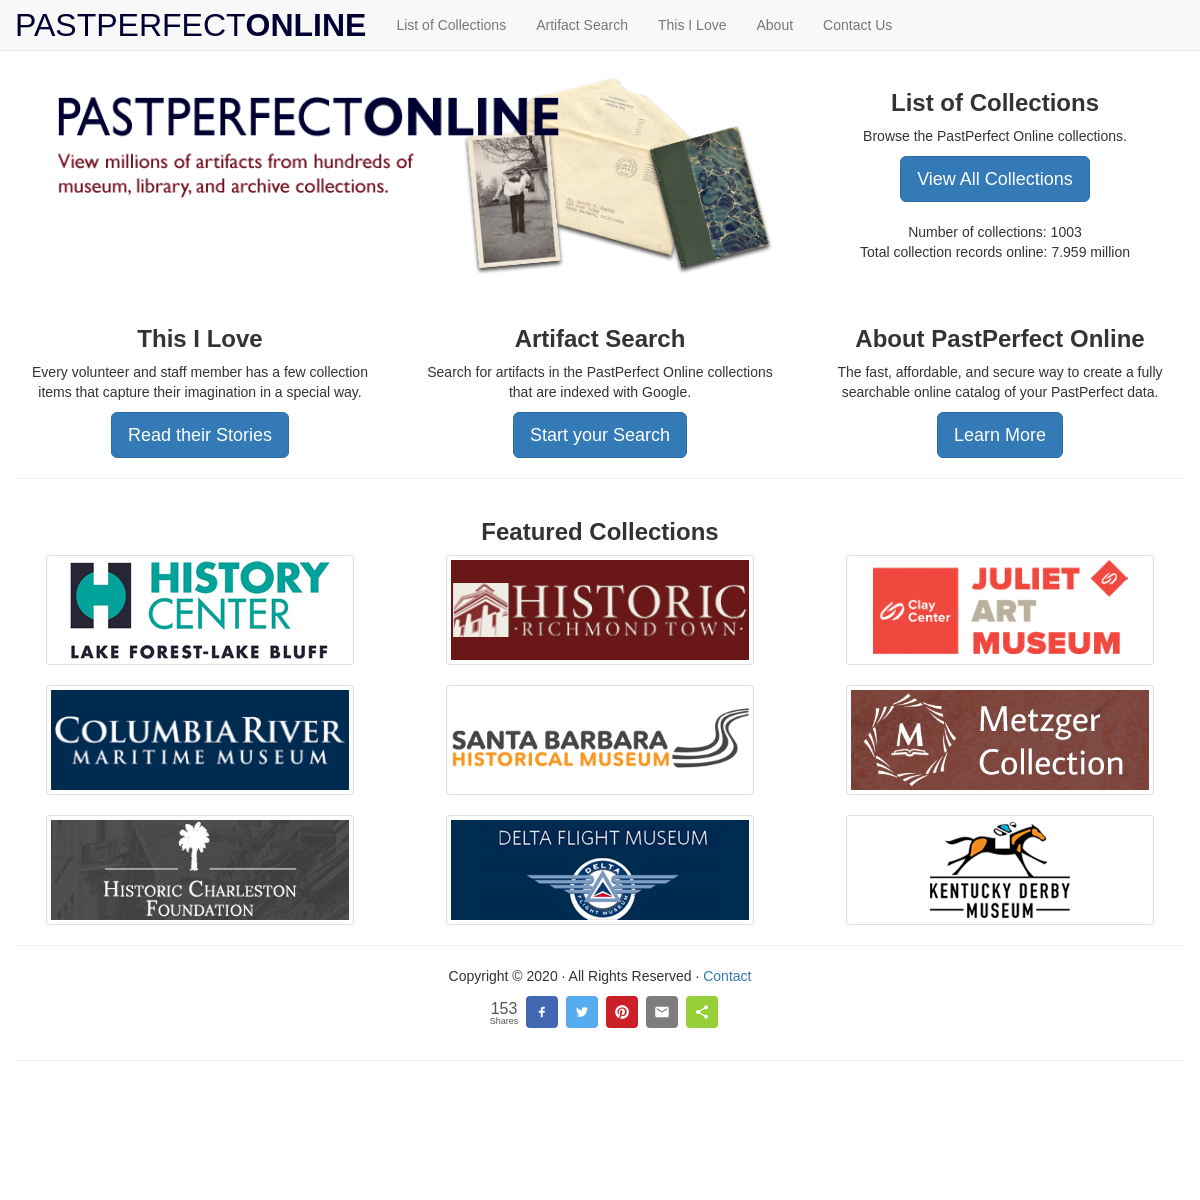 A complete backup of pastperfect-online.com